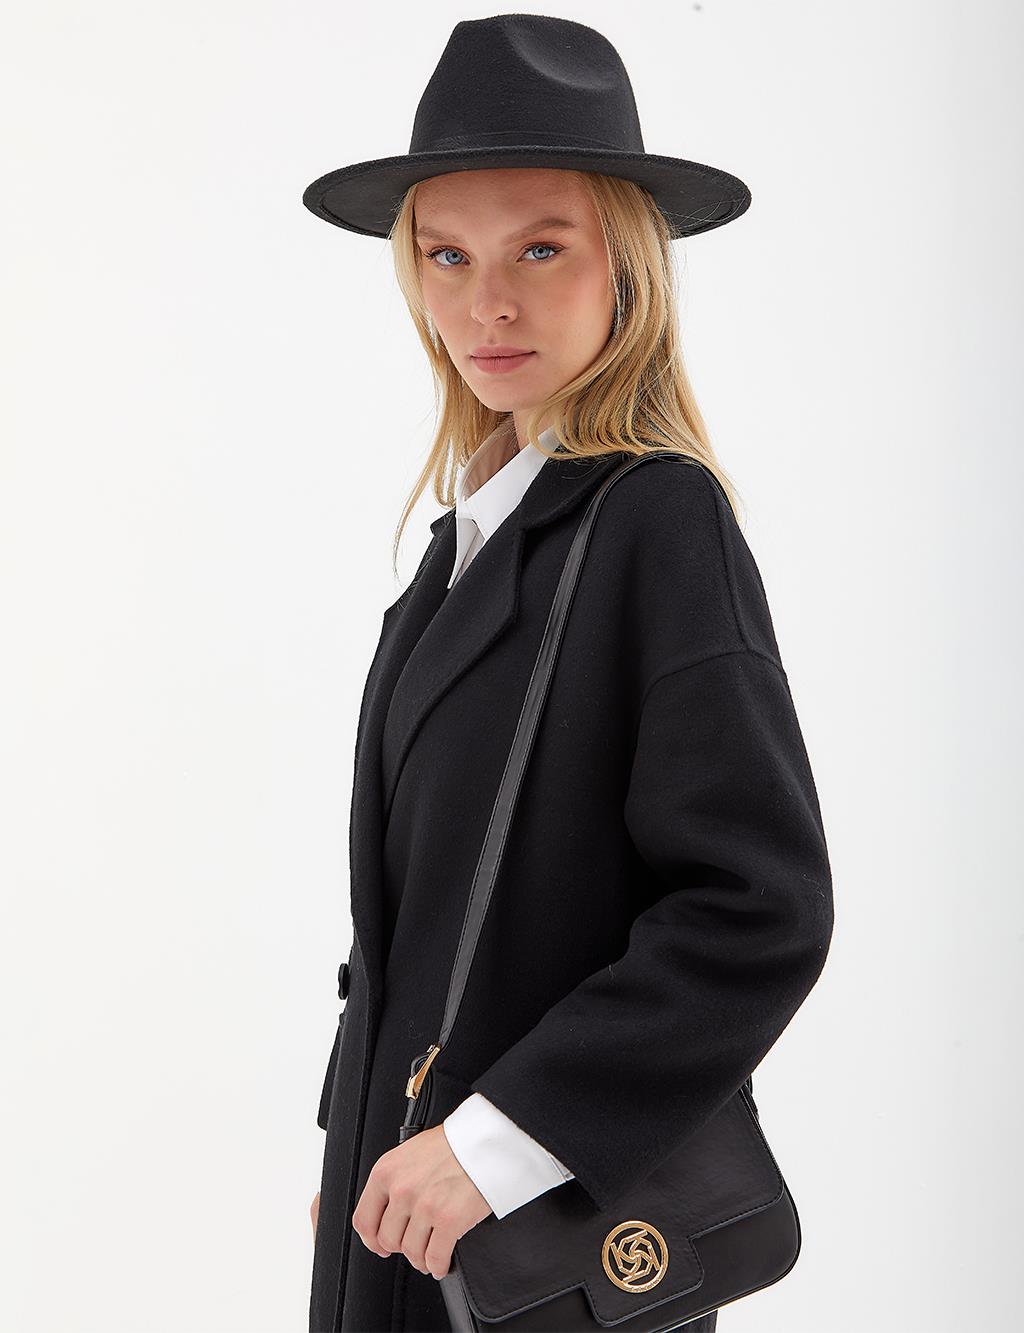 Premium Wool Double-Breasted Coat with Large Pockets Black